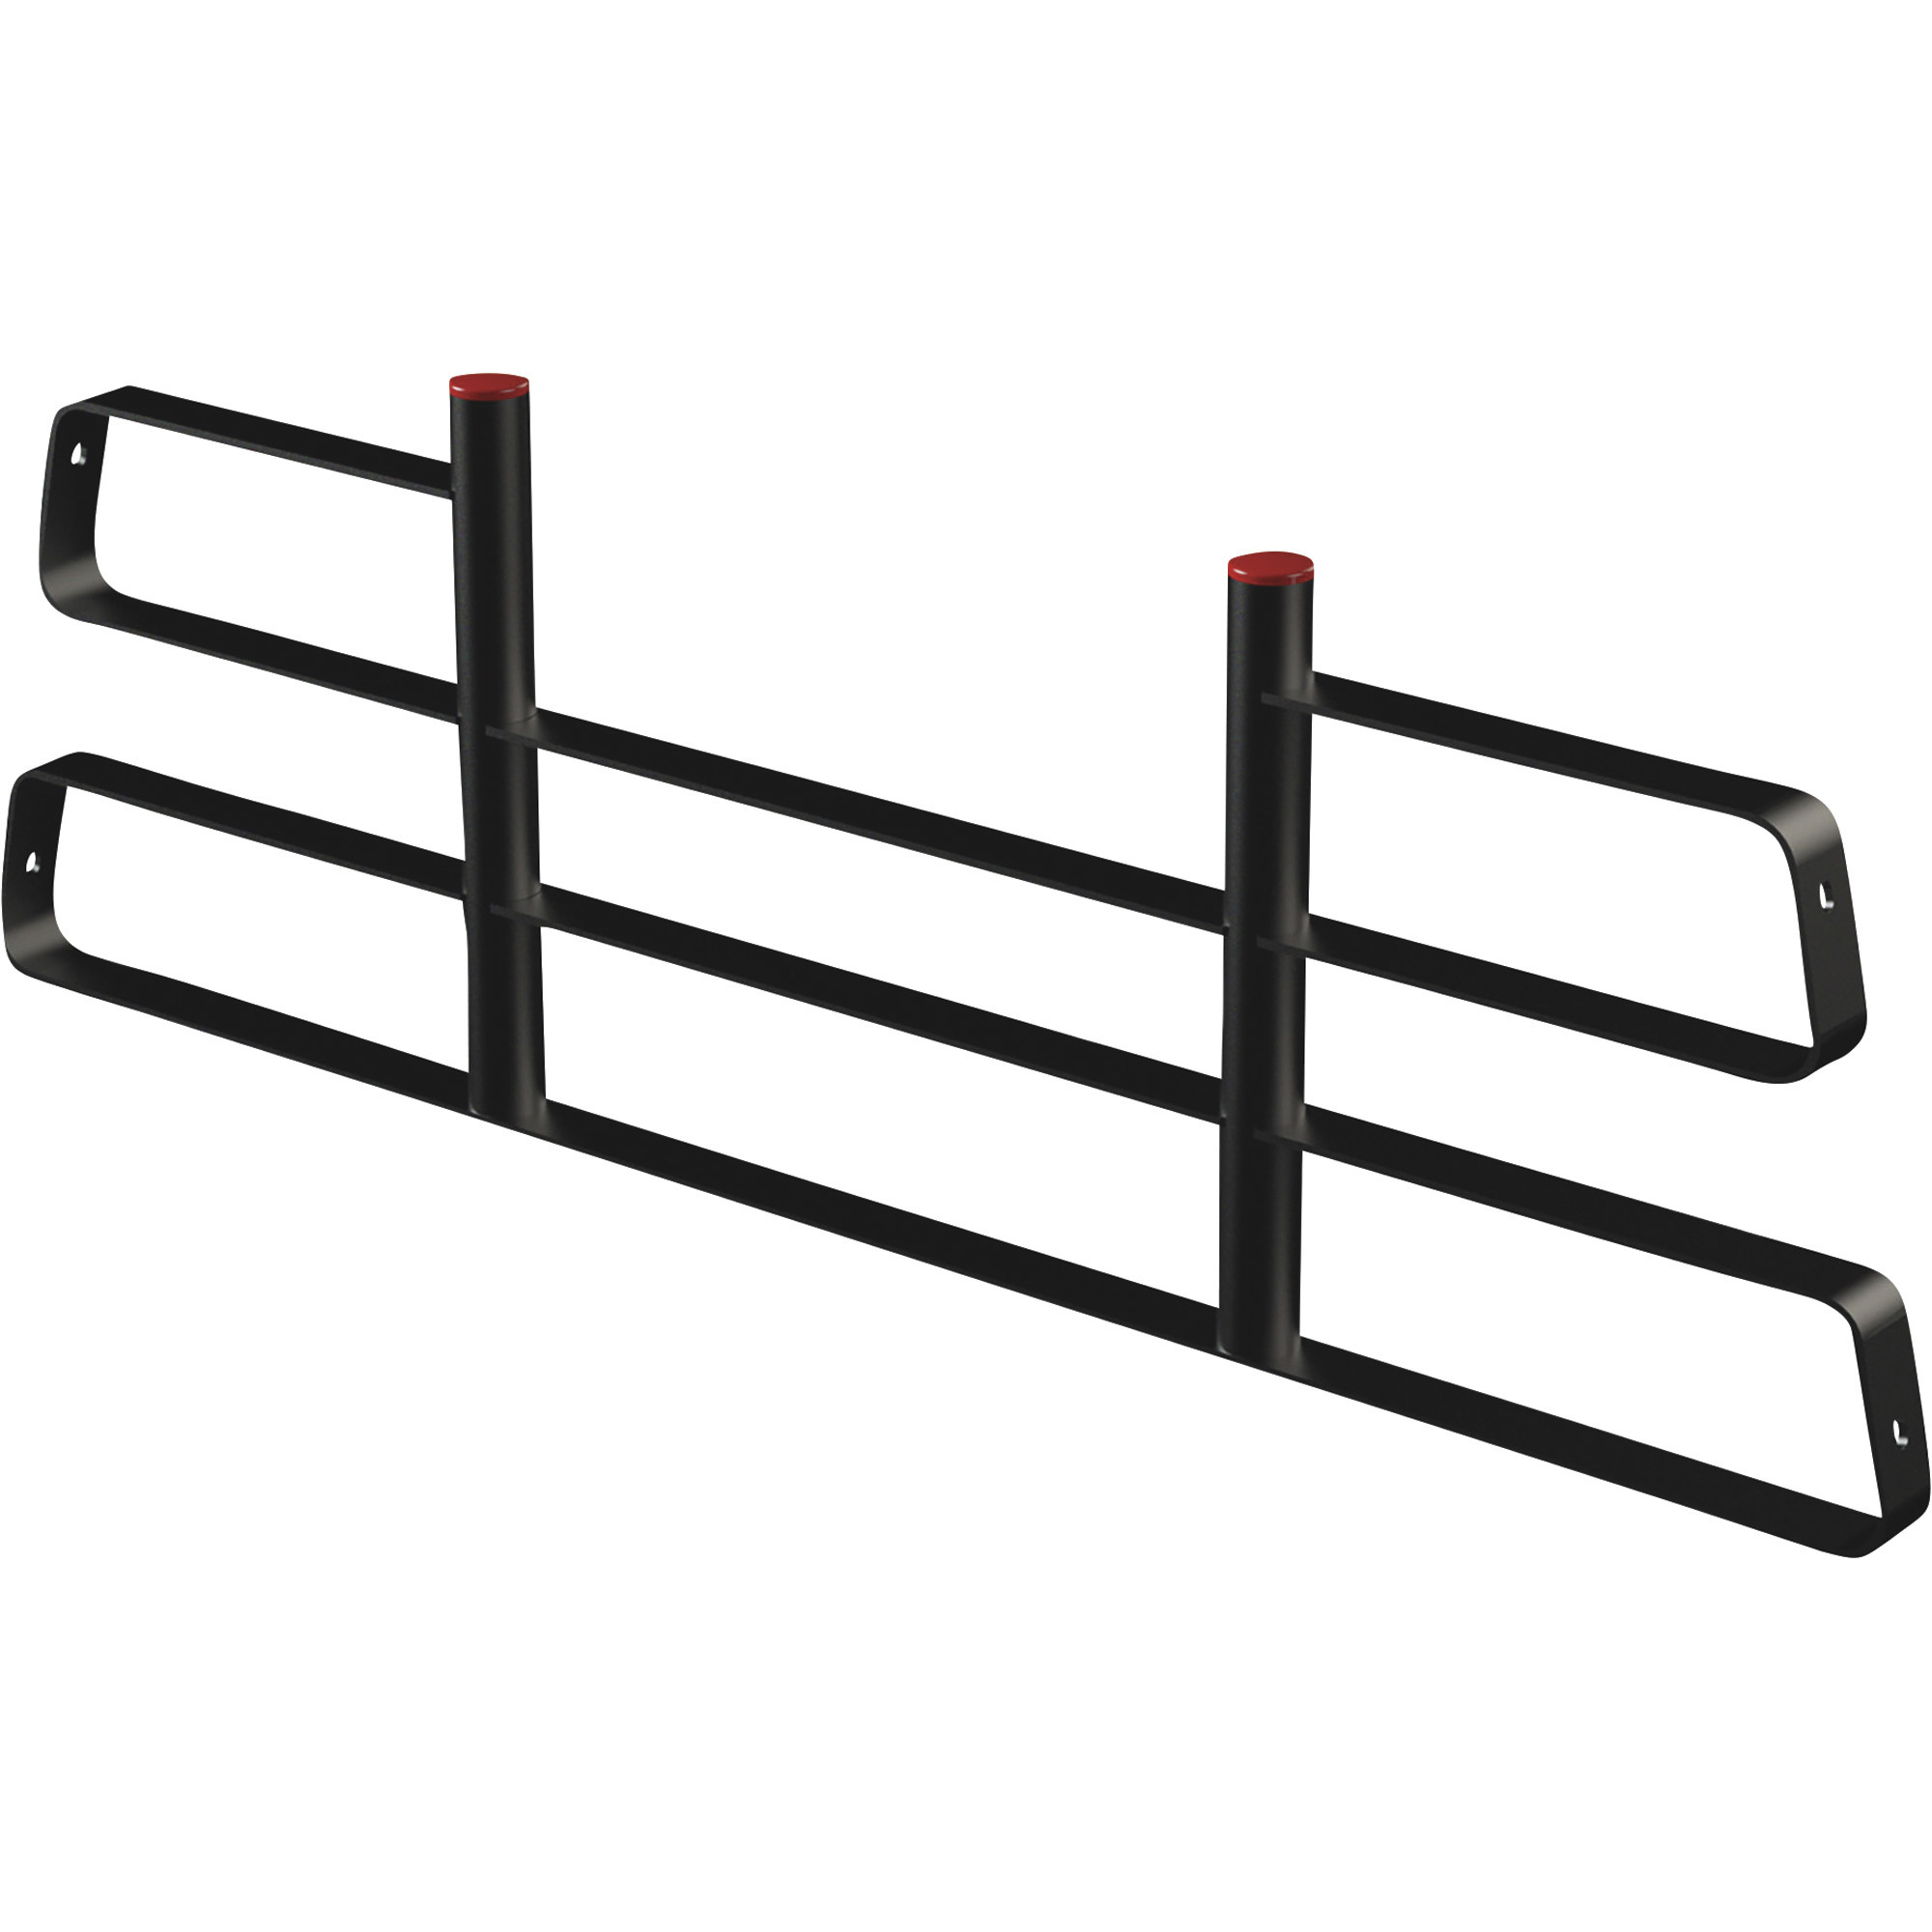 Weather Guard Steel Truck Headache Rack, For Use with Model 1345-52-02 Compact Truck Rack, Model 1058-52-01